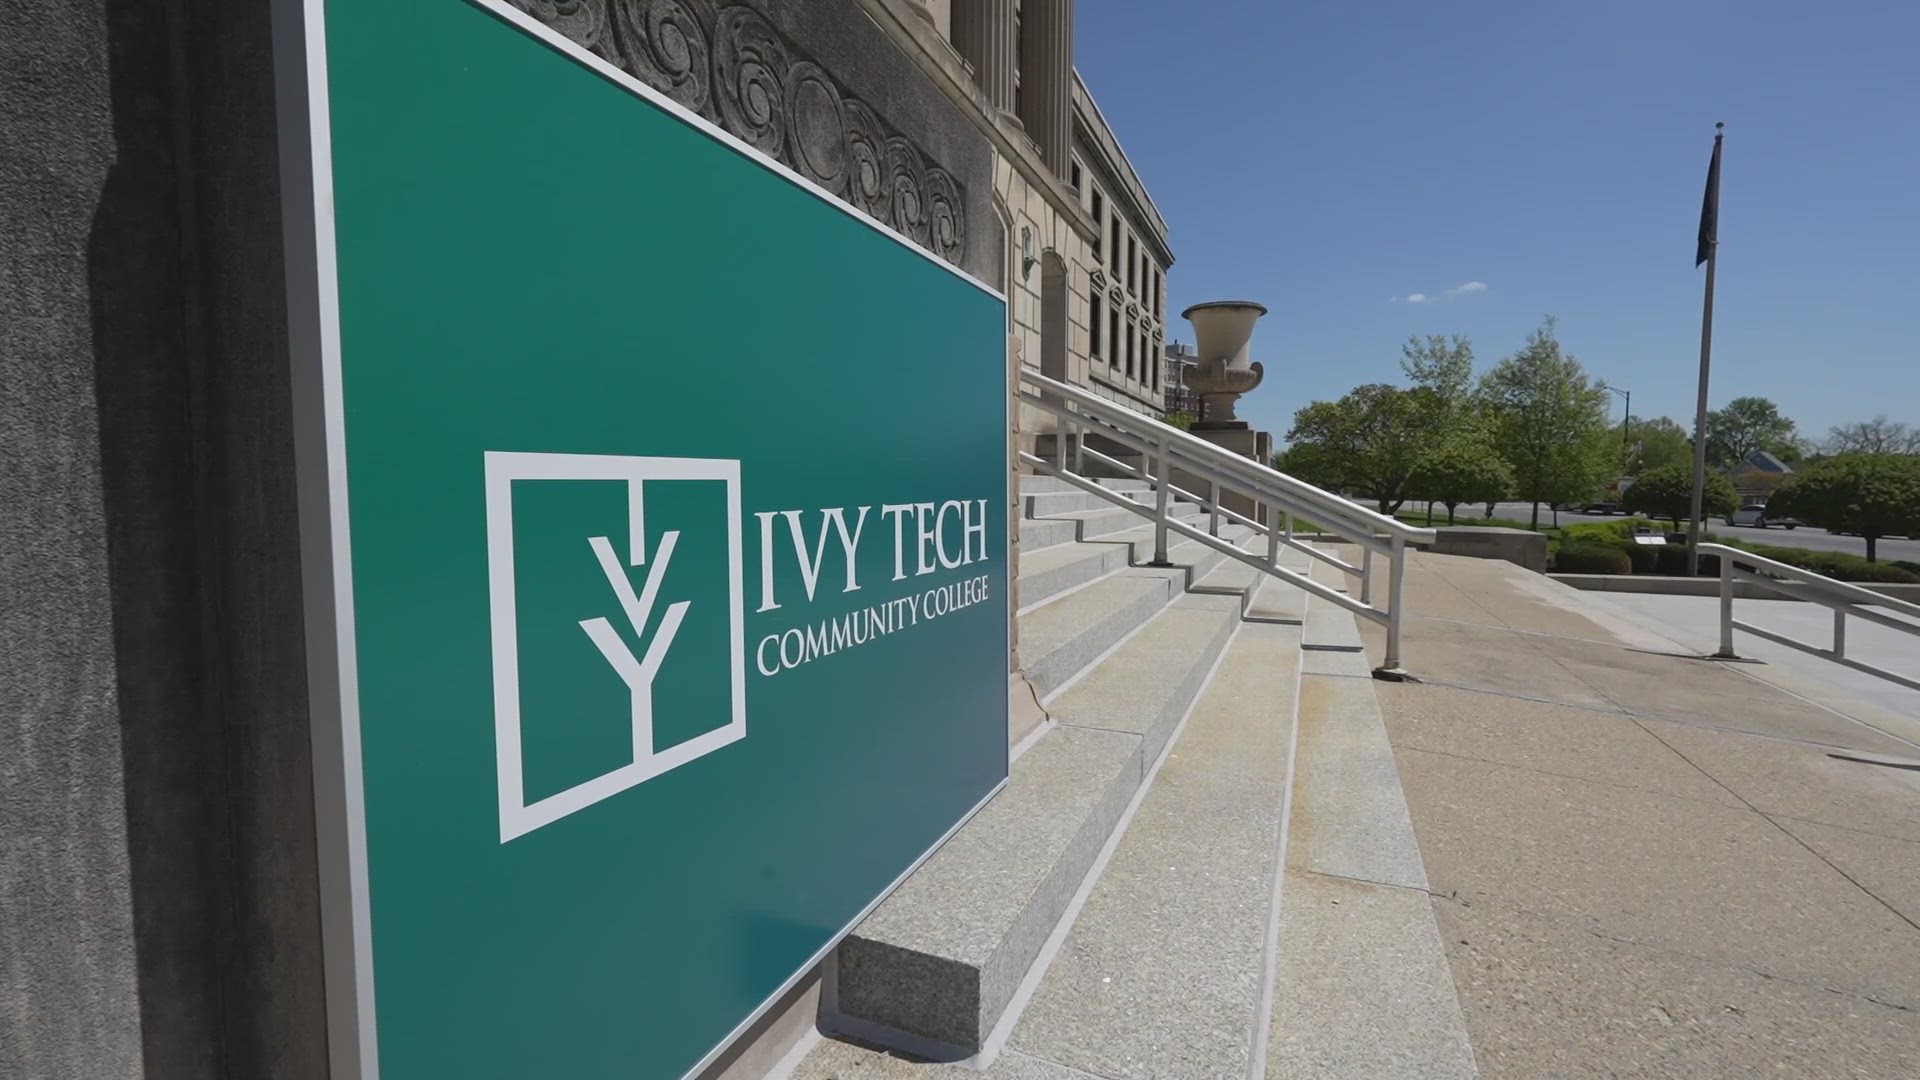 For a second year in a row, Ivy Tech is offering the free courses to high school students including graduating seniors.